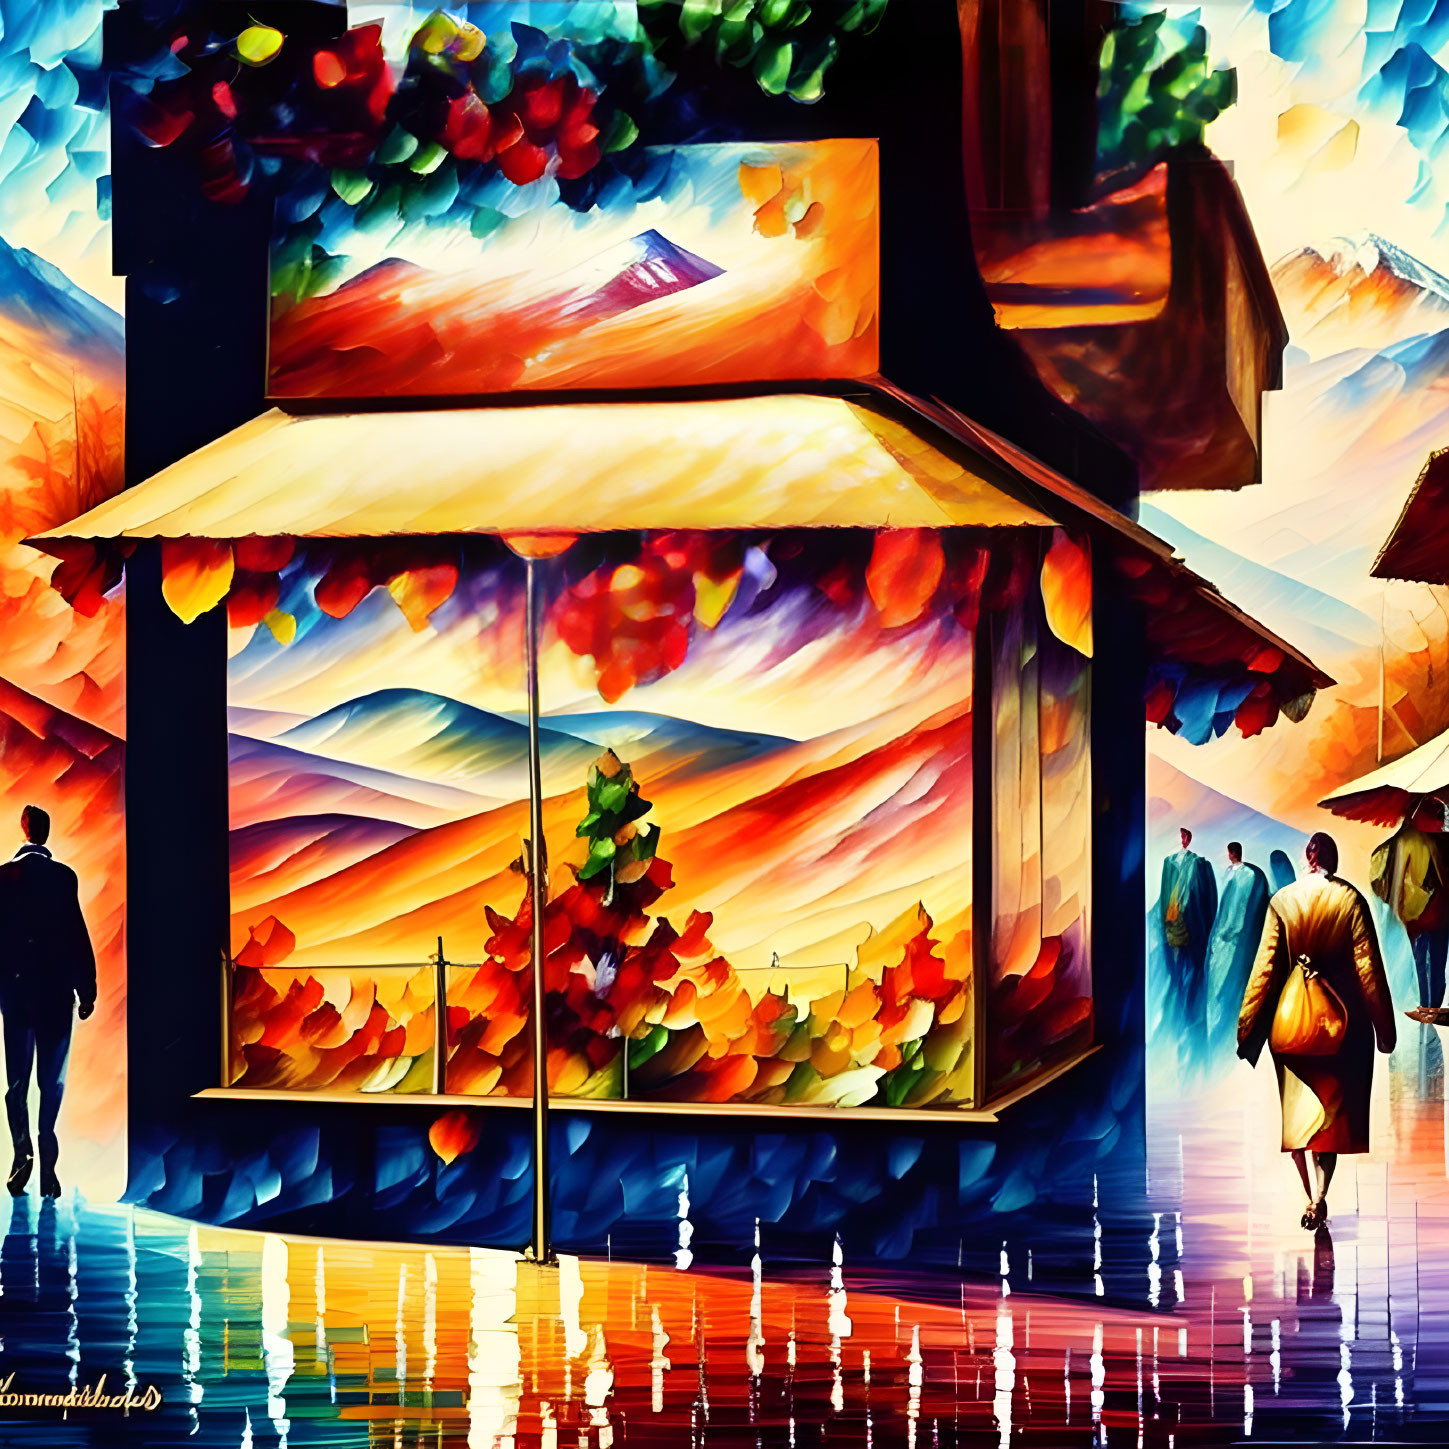 Vibrant abstract street scene with sunset sky and silhouetted figures